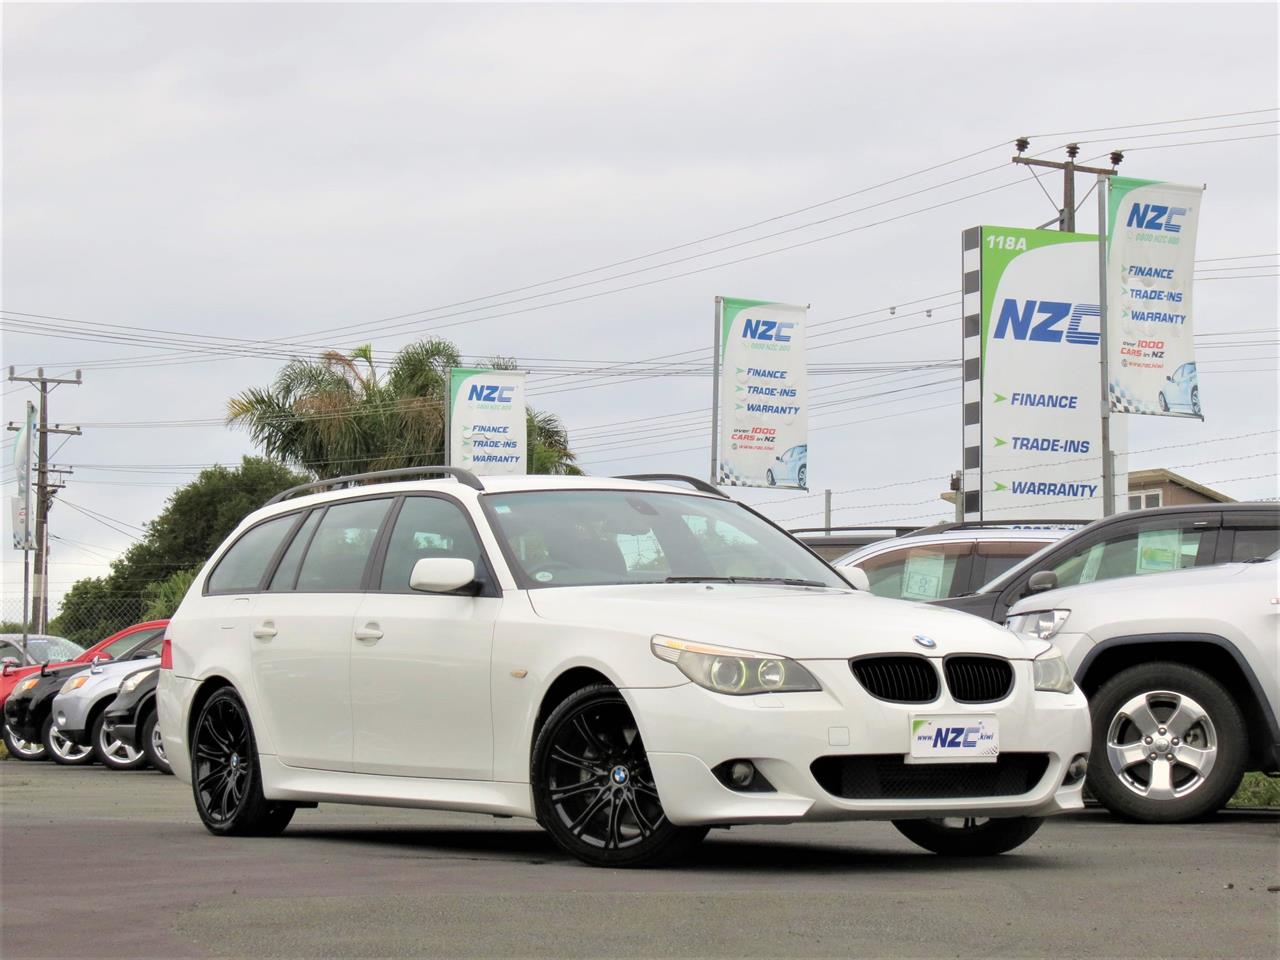 NZC 2007 BMW 525i just arrived to Auckland